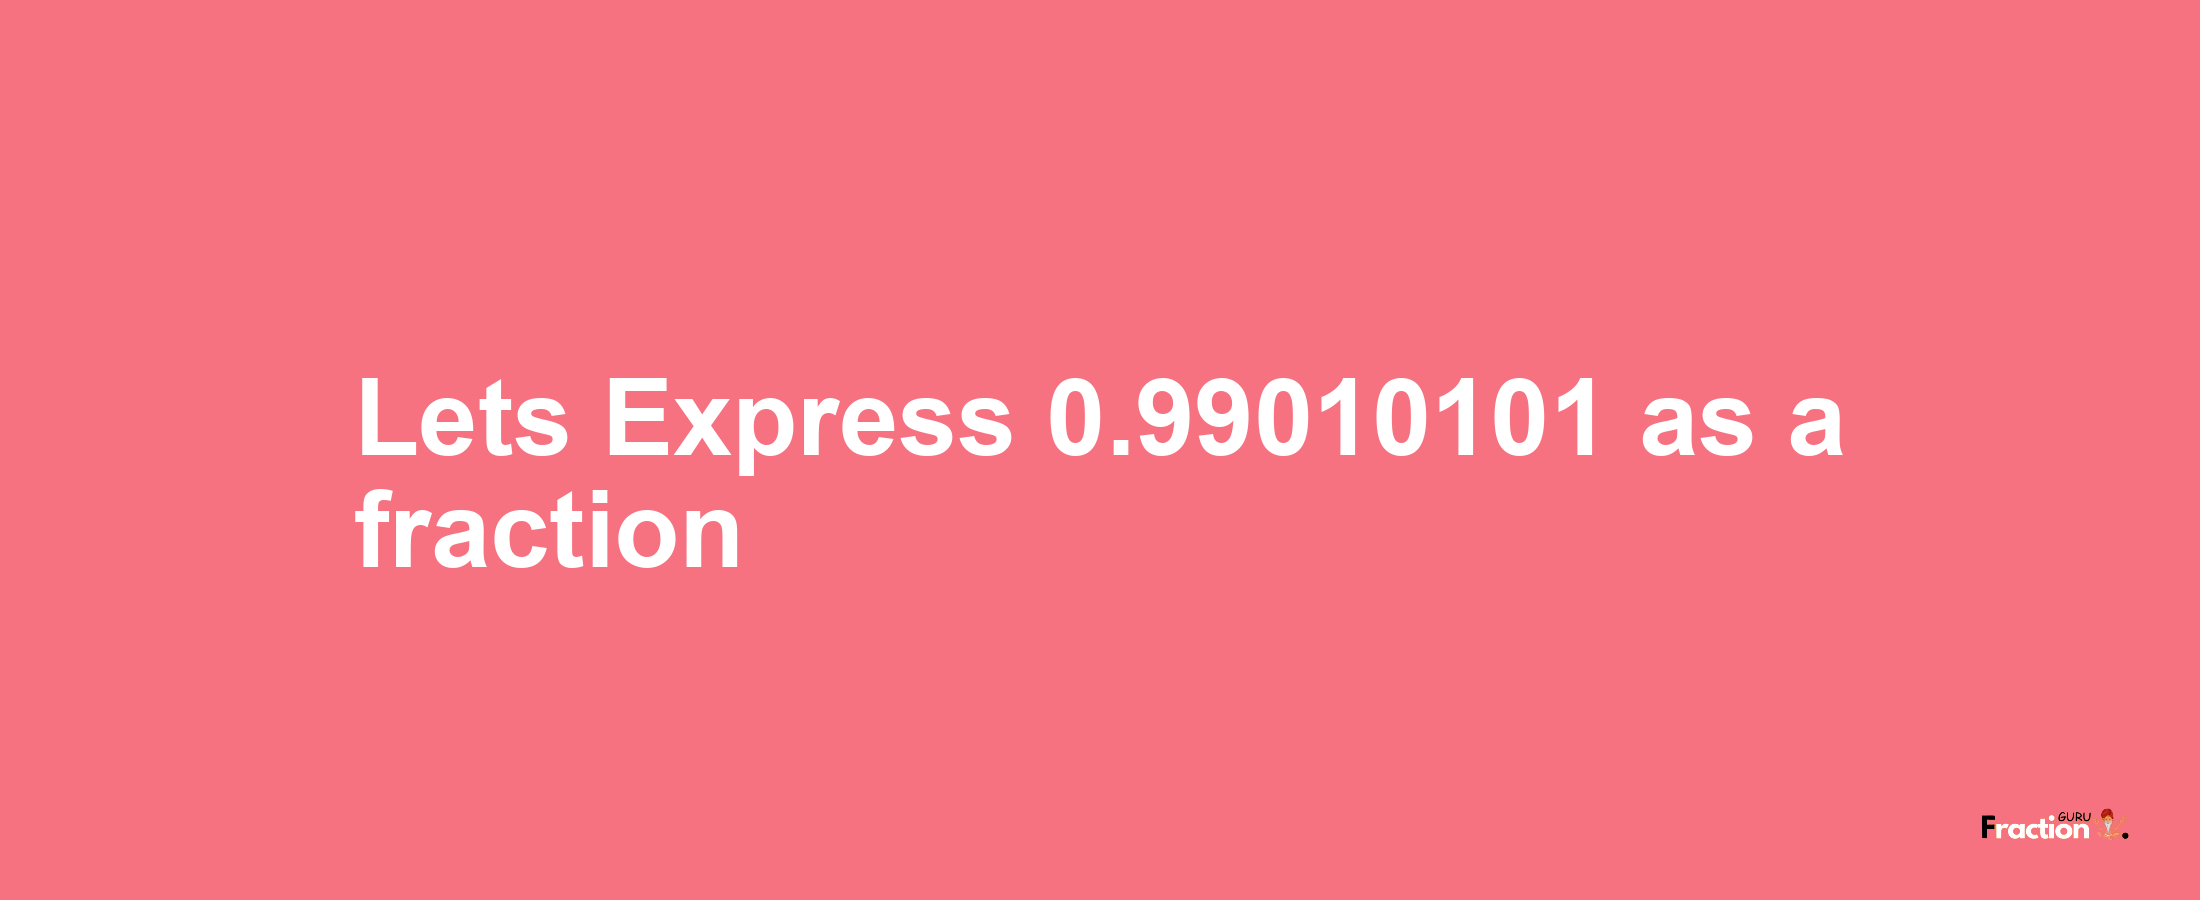 Lets Express 0.99010101 as afraction